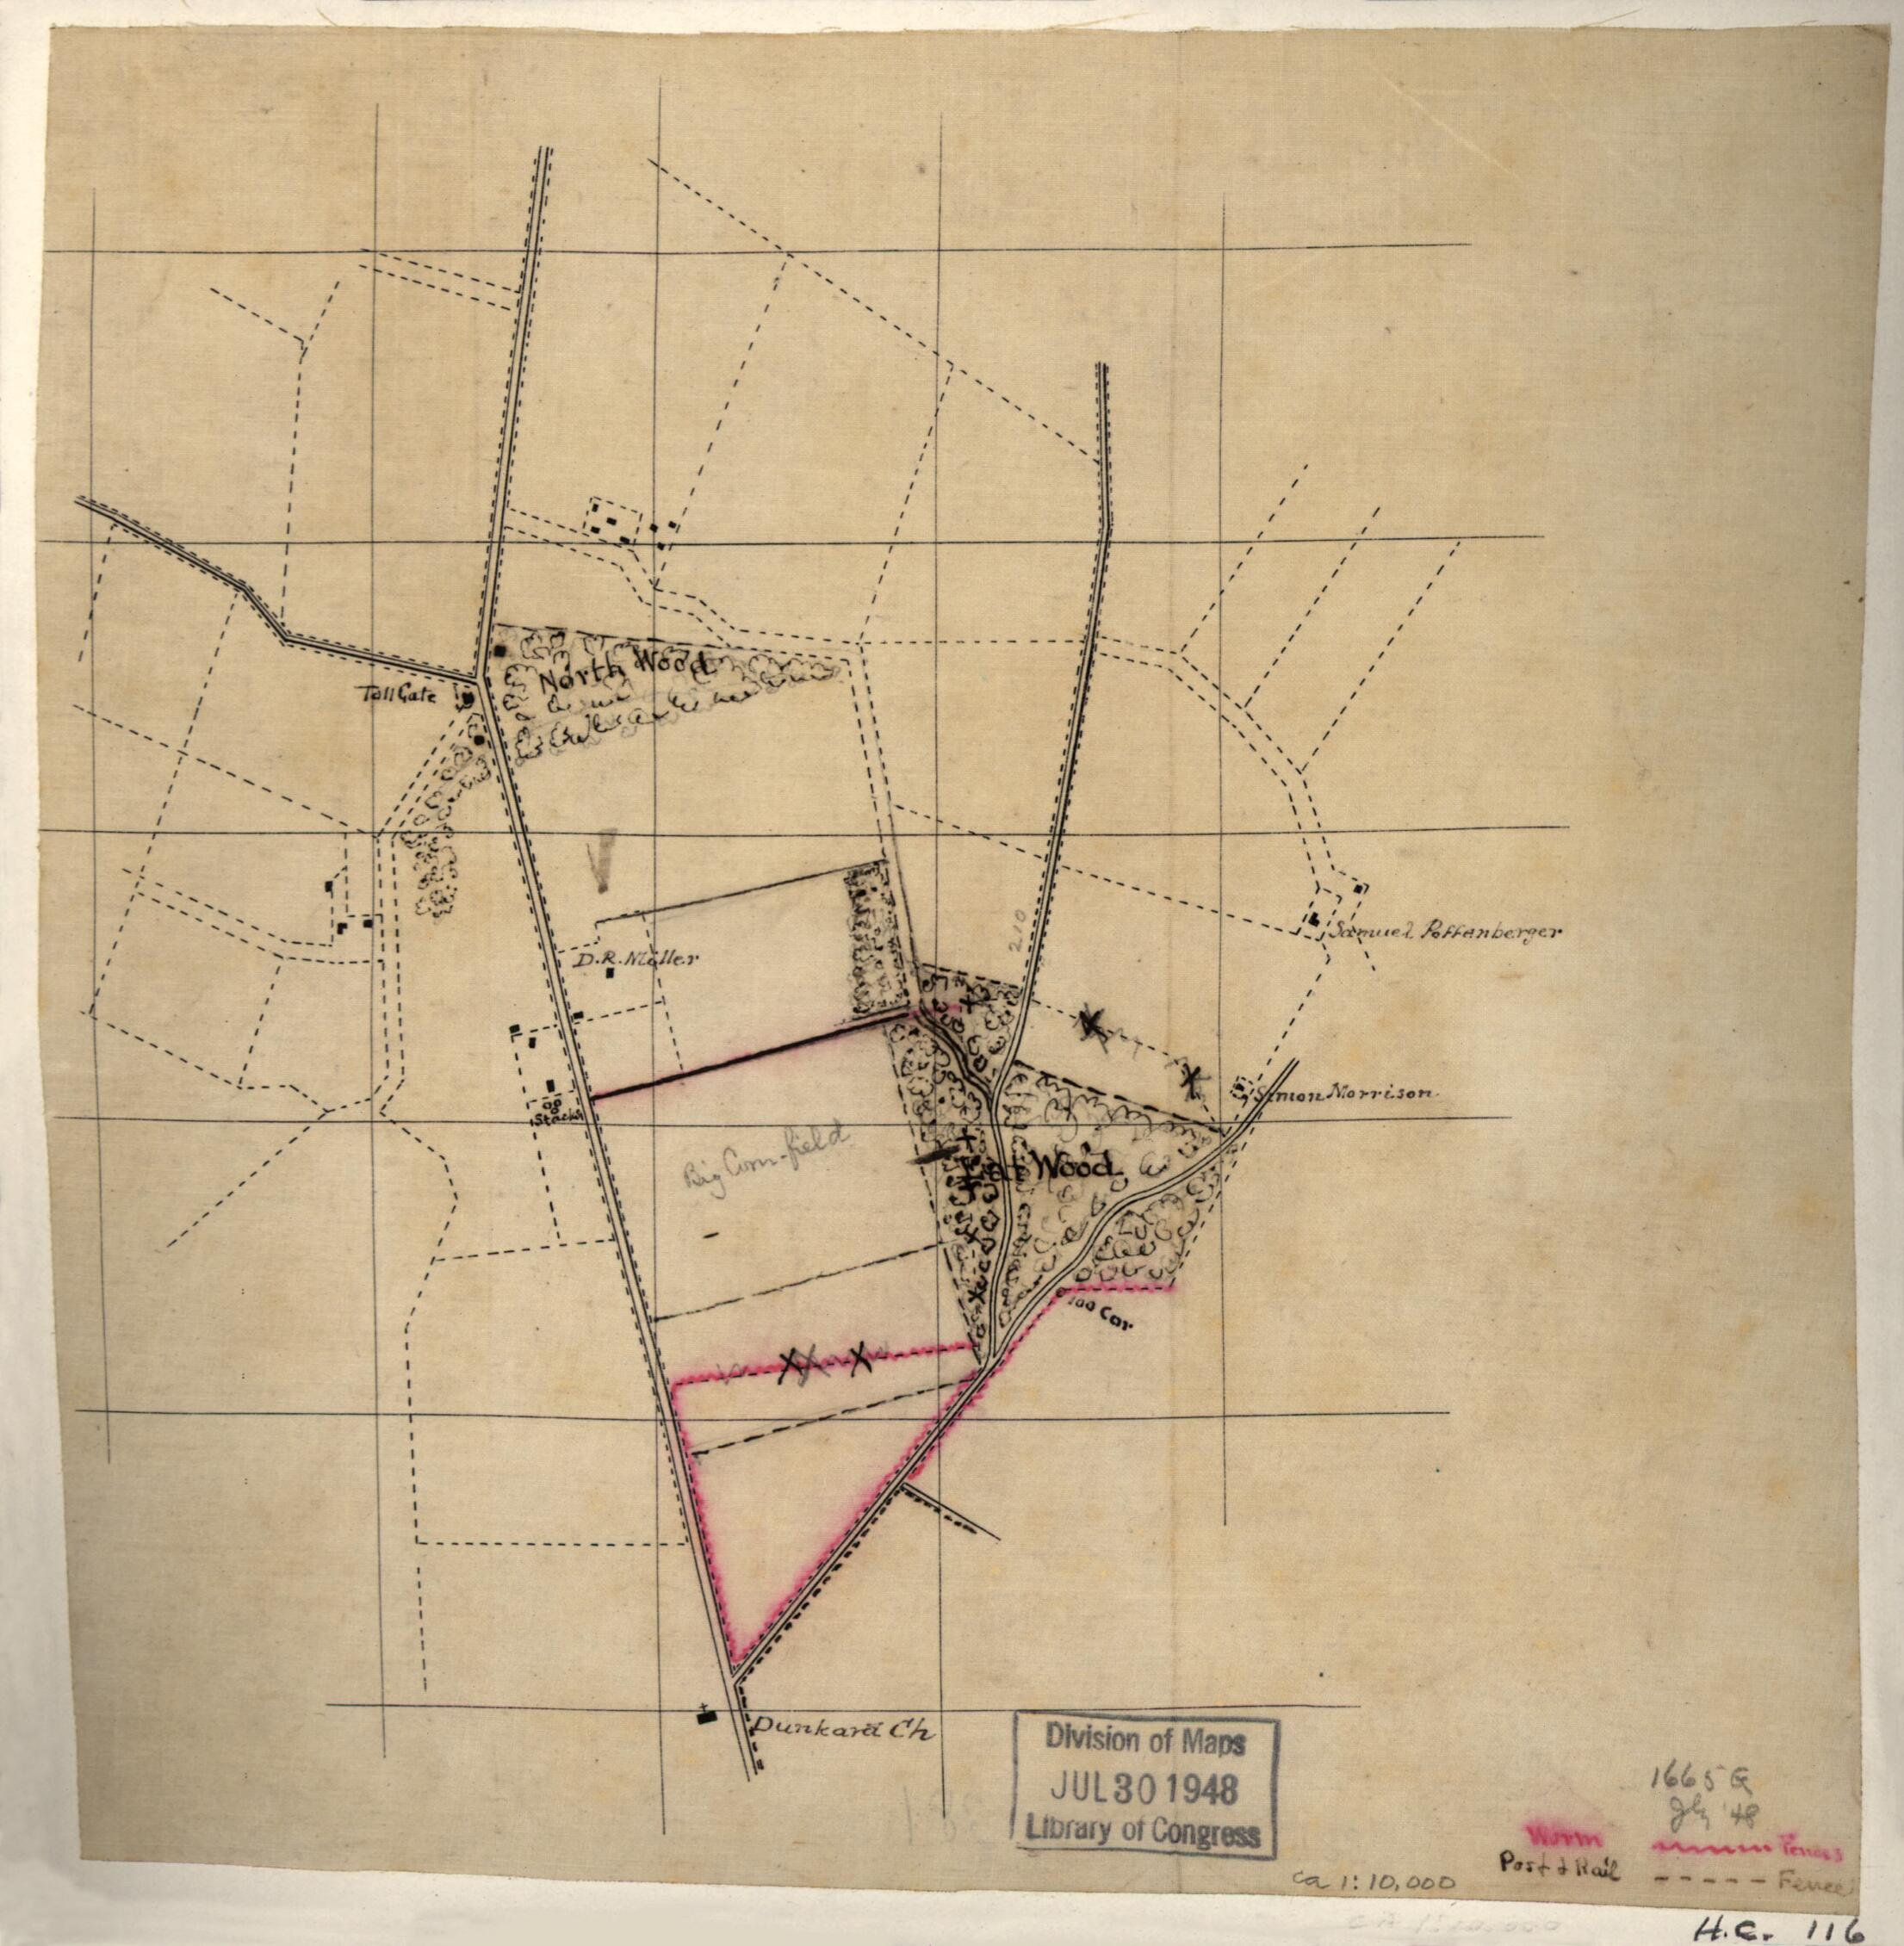 This old map of Sketch of a Portion of the Antietam Battlefield, North of Sharpsburg, In the Area of the West Wood, North Wood, and East Wood from 1895 was created by  in 1895